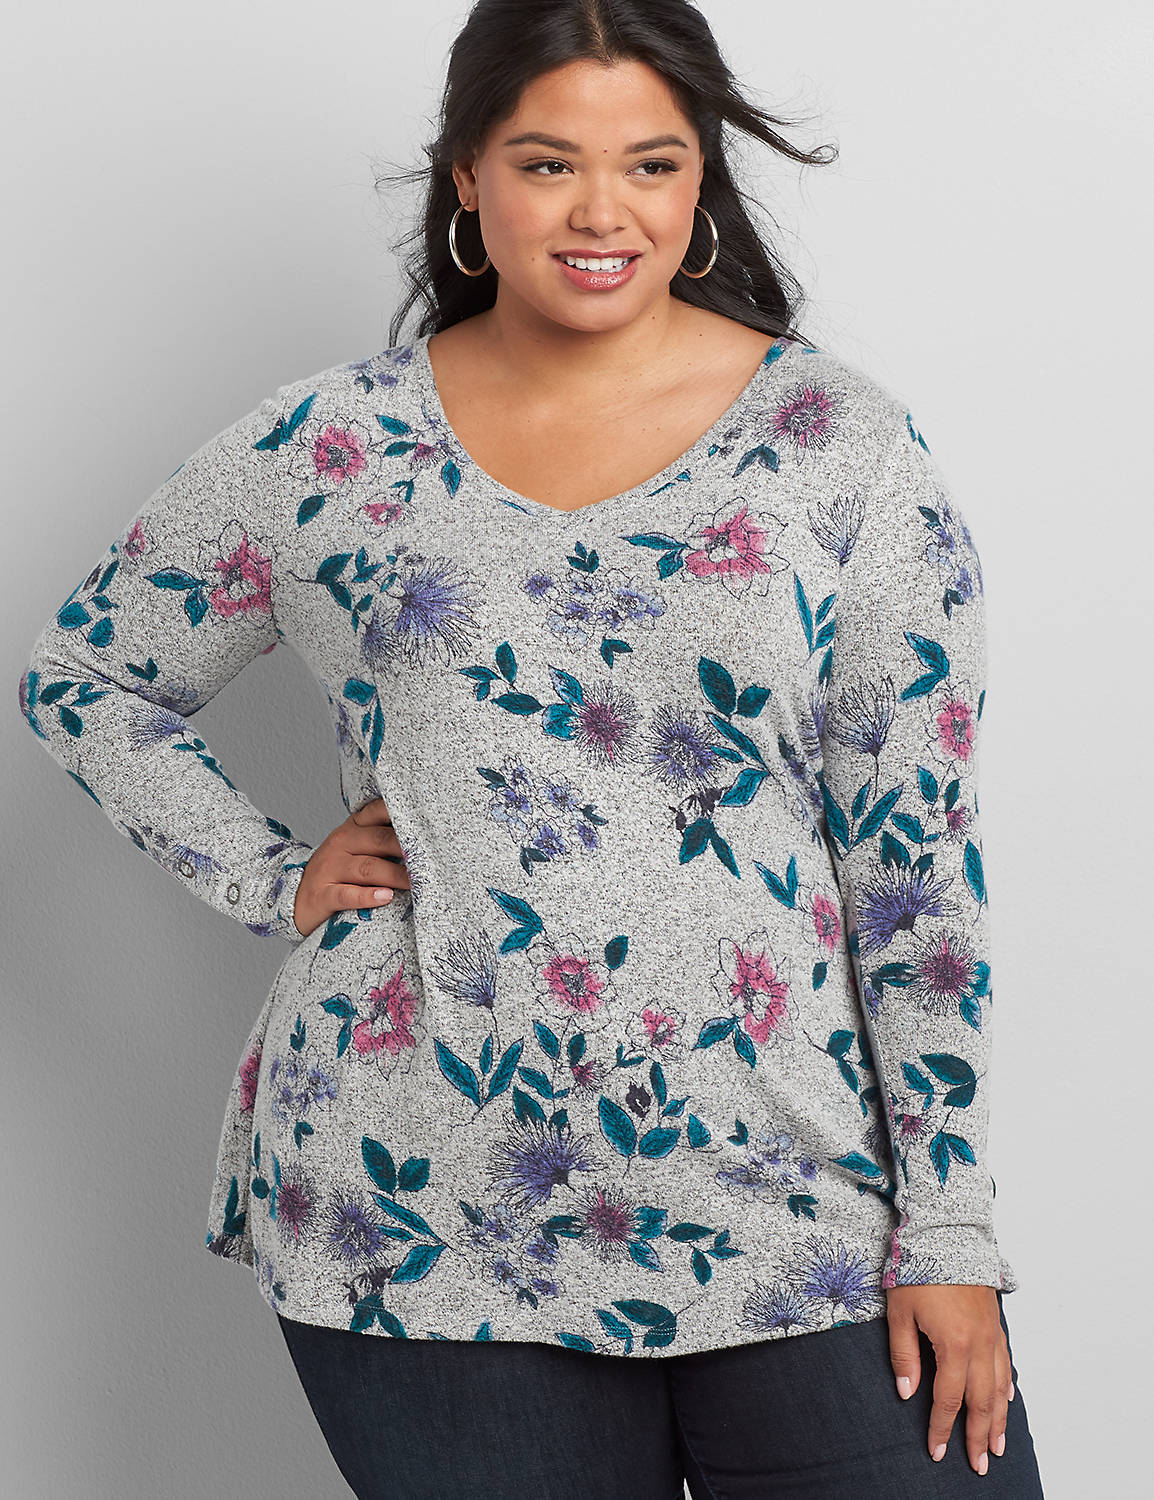 Long Sleeve VNeck Swing Tunic 1117551:LBH20232_MultiGemmaFloral_colorway4:18/20 Product Image 1